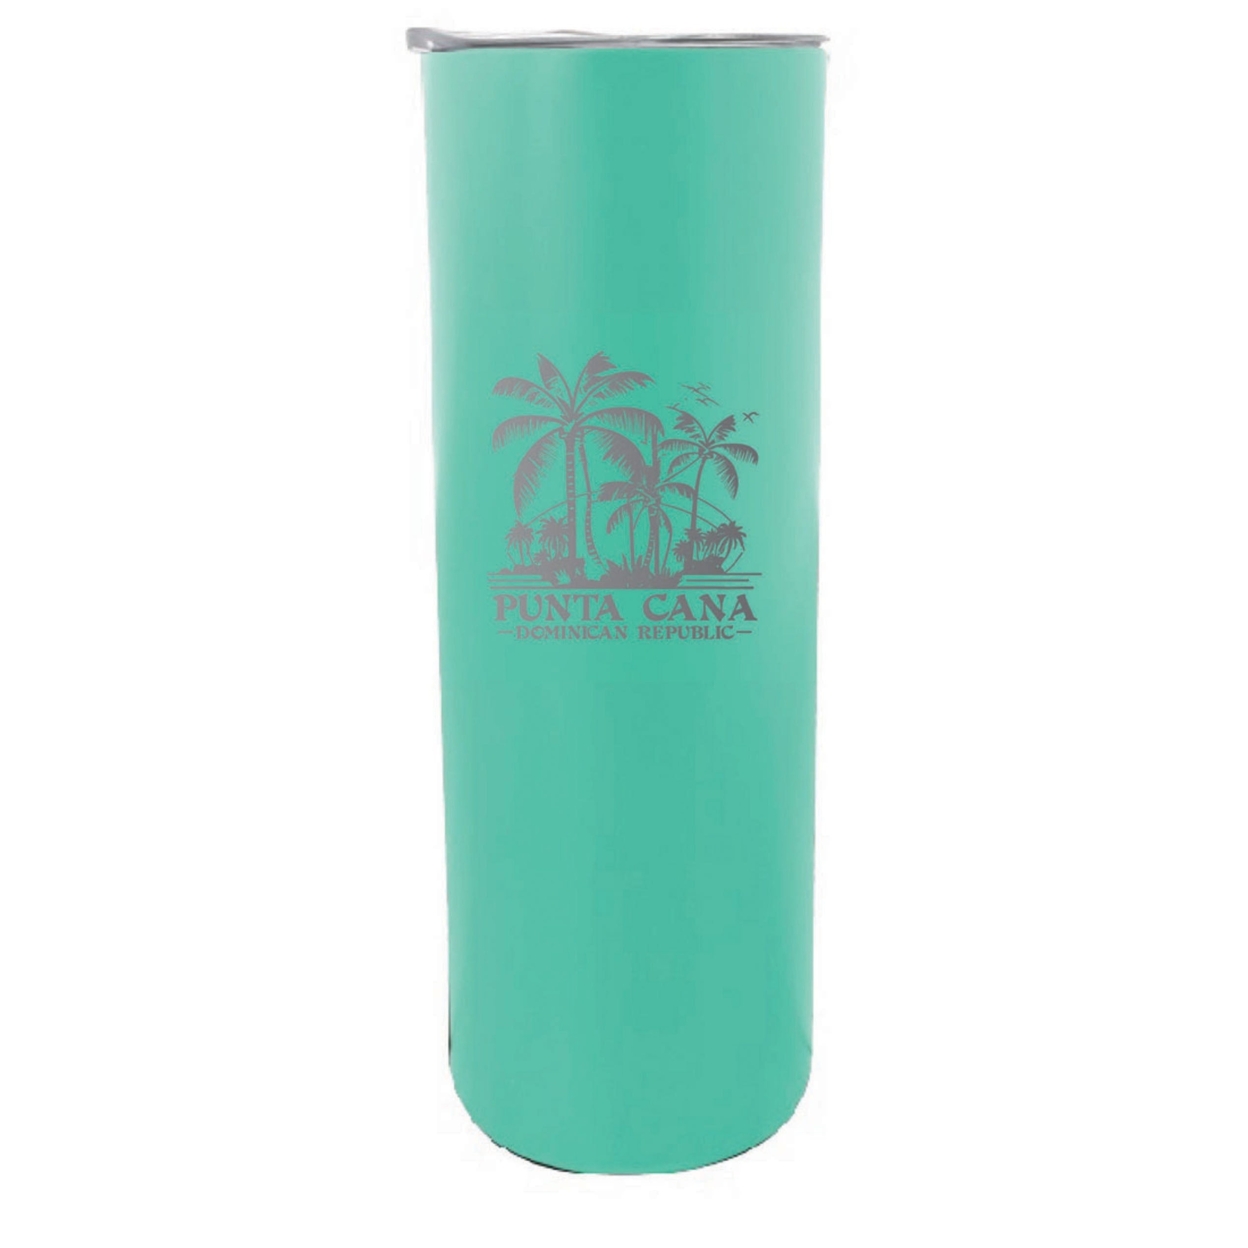 Punta Cana Dominican Republic Souvenir 20 Oz Insulated Stainless Steel Skinny Tumbler Etched - Navy, PALM BEACH